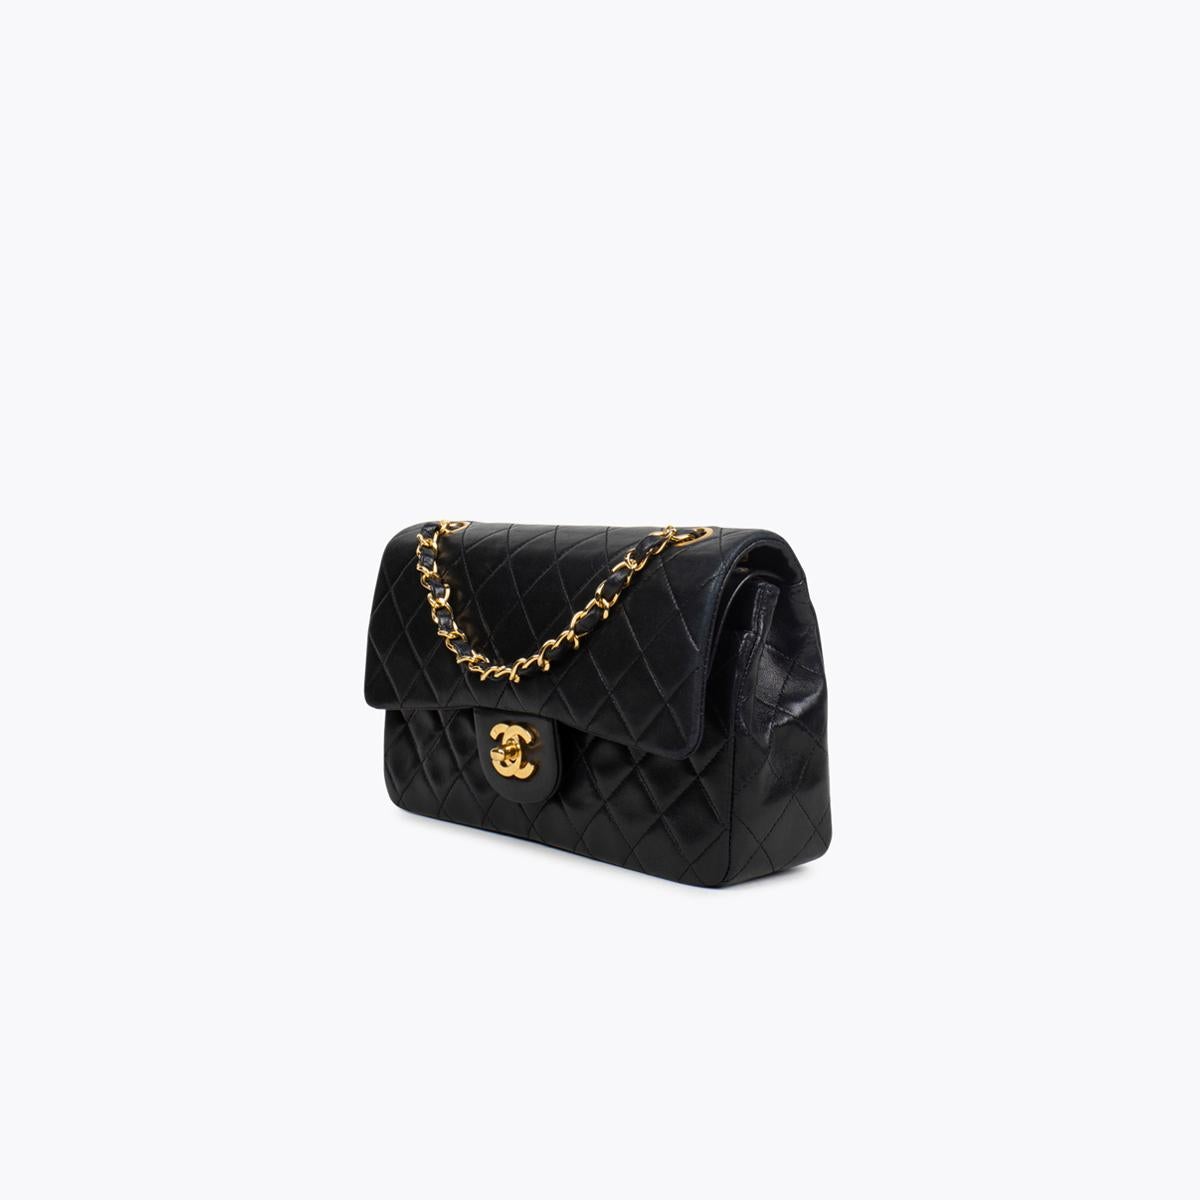 Black quilted lambskin Chanel Small Classic/Timeless Double Flap bag with

– Gold-tone hardware
– Convertible chain-link and leather shoulder strap
– Burgundy leather lining
– Single patch pocket at back
– Single zip pocket at flap underside, three